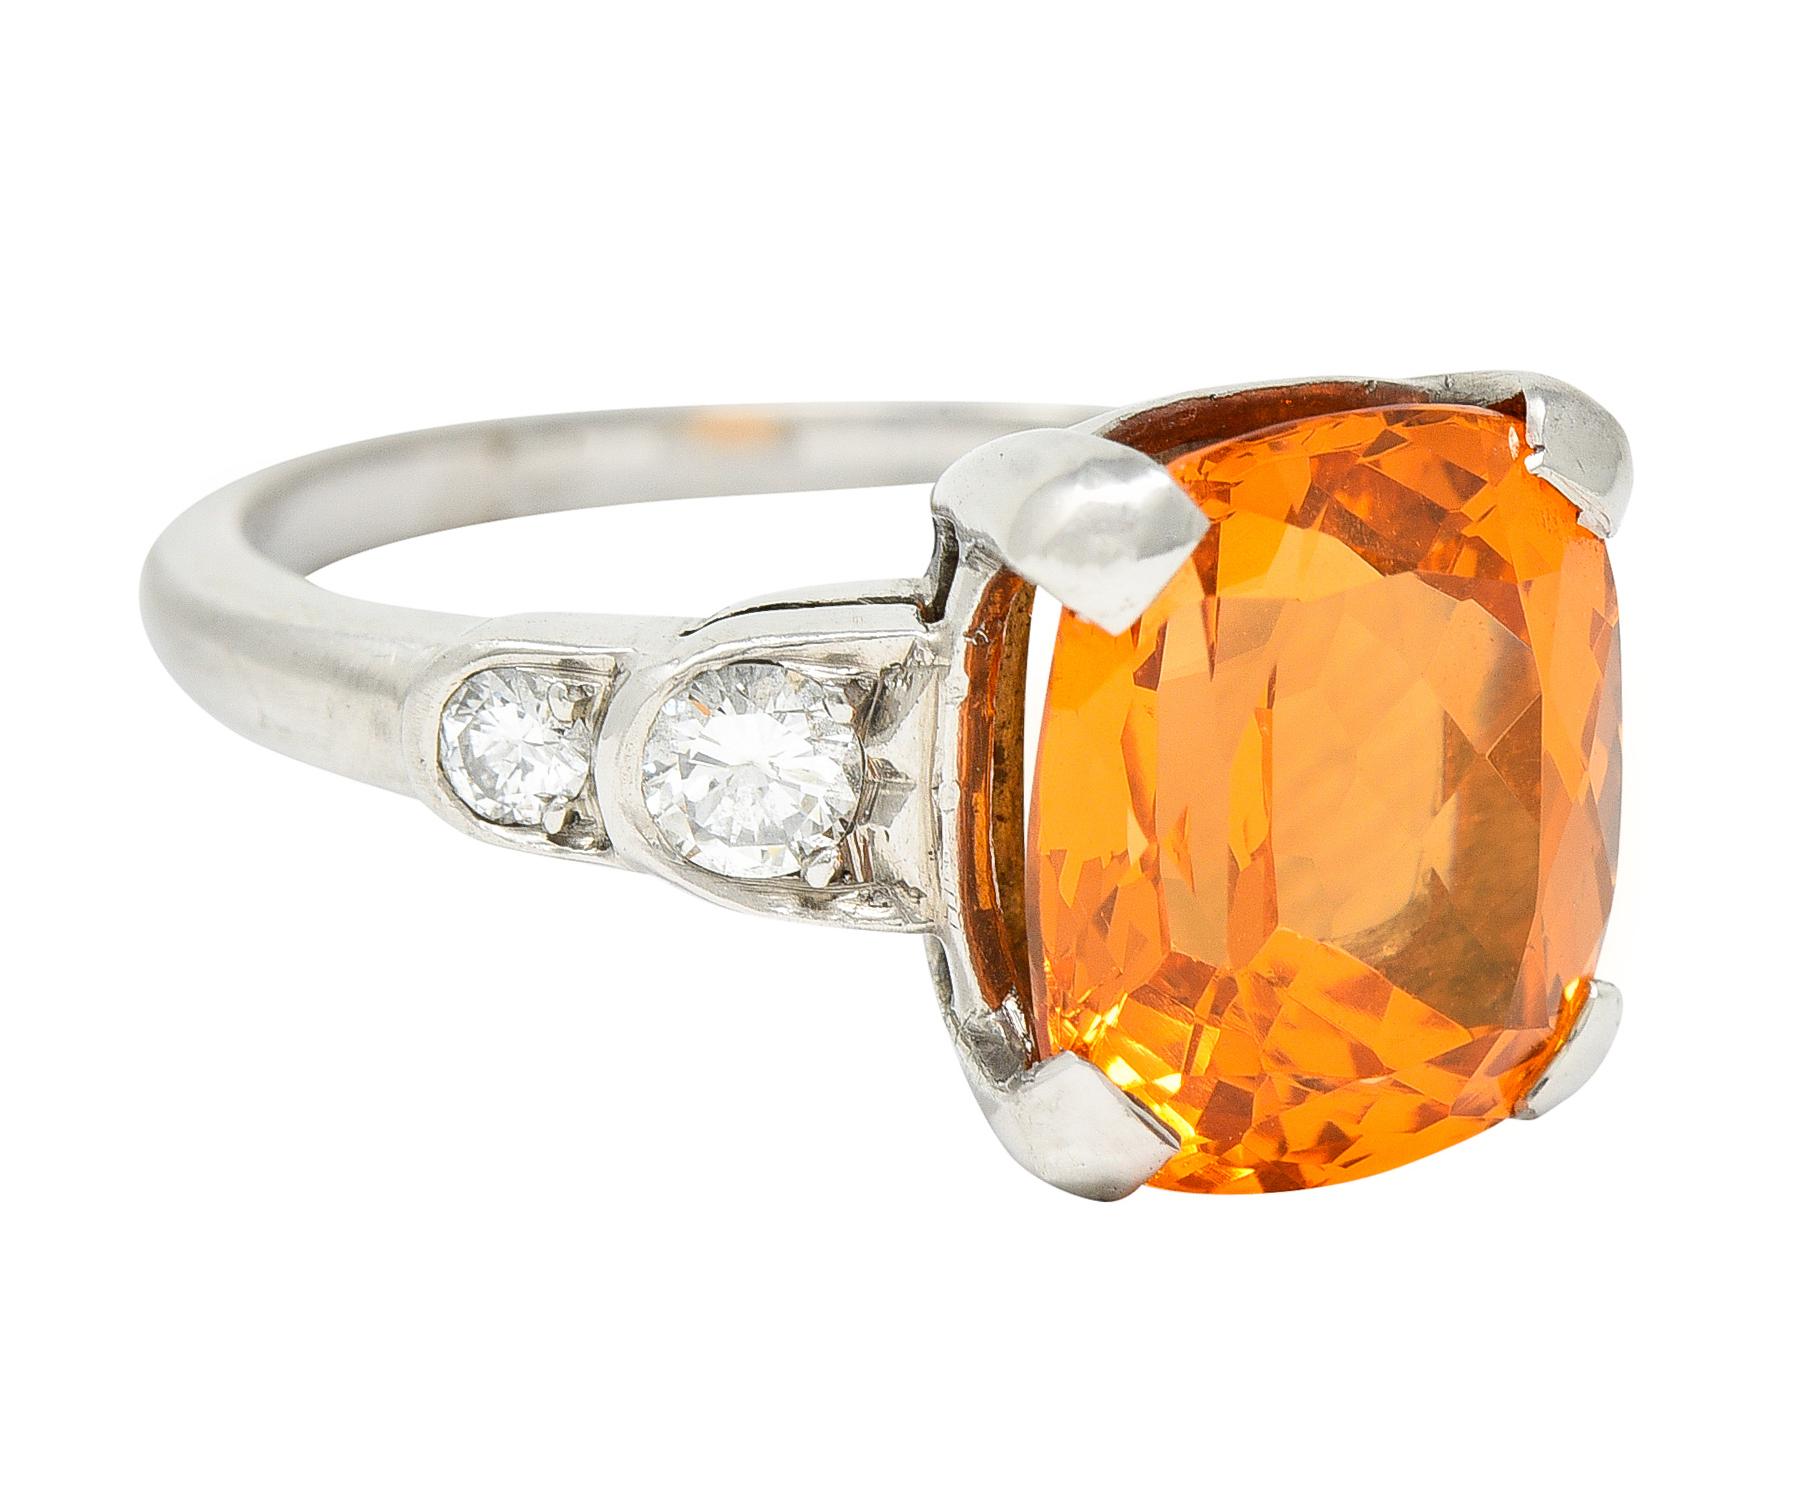 Featuring a mixed cushion cut spessartite garnet weighing 5.41 carats

Eye clean with strong and uniform orange color

Basket set and flanked by stylized scallop stepped shoulders

Accented by round brilliant cut diamonds weighing approximately 0.25